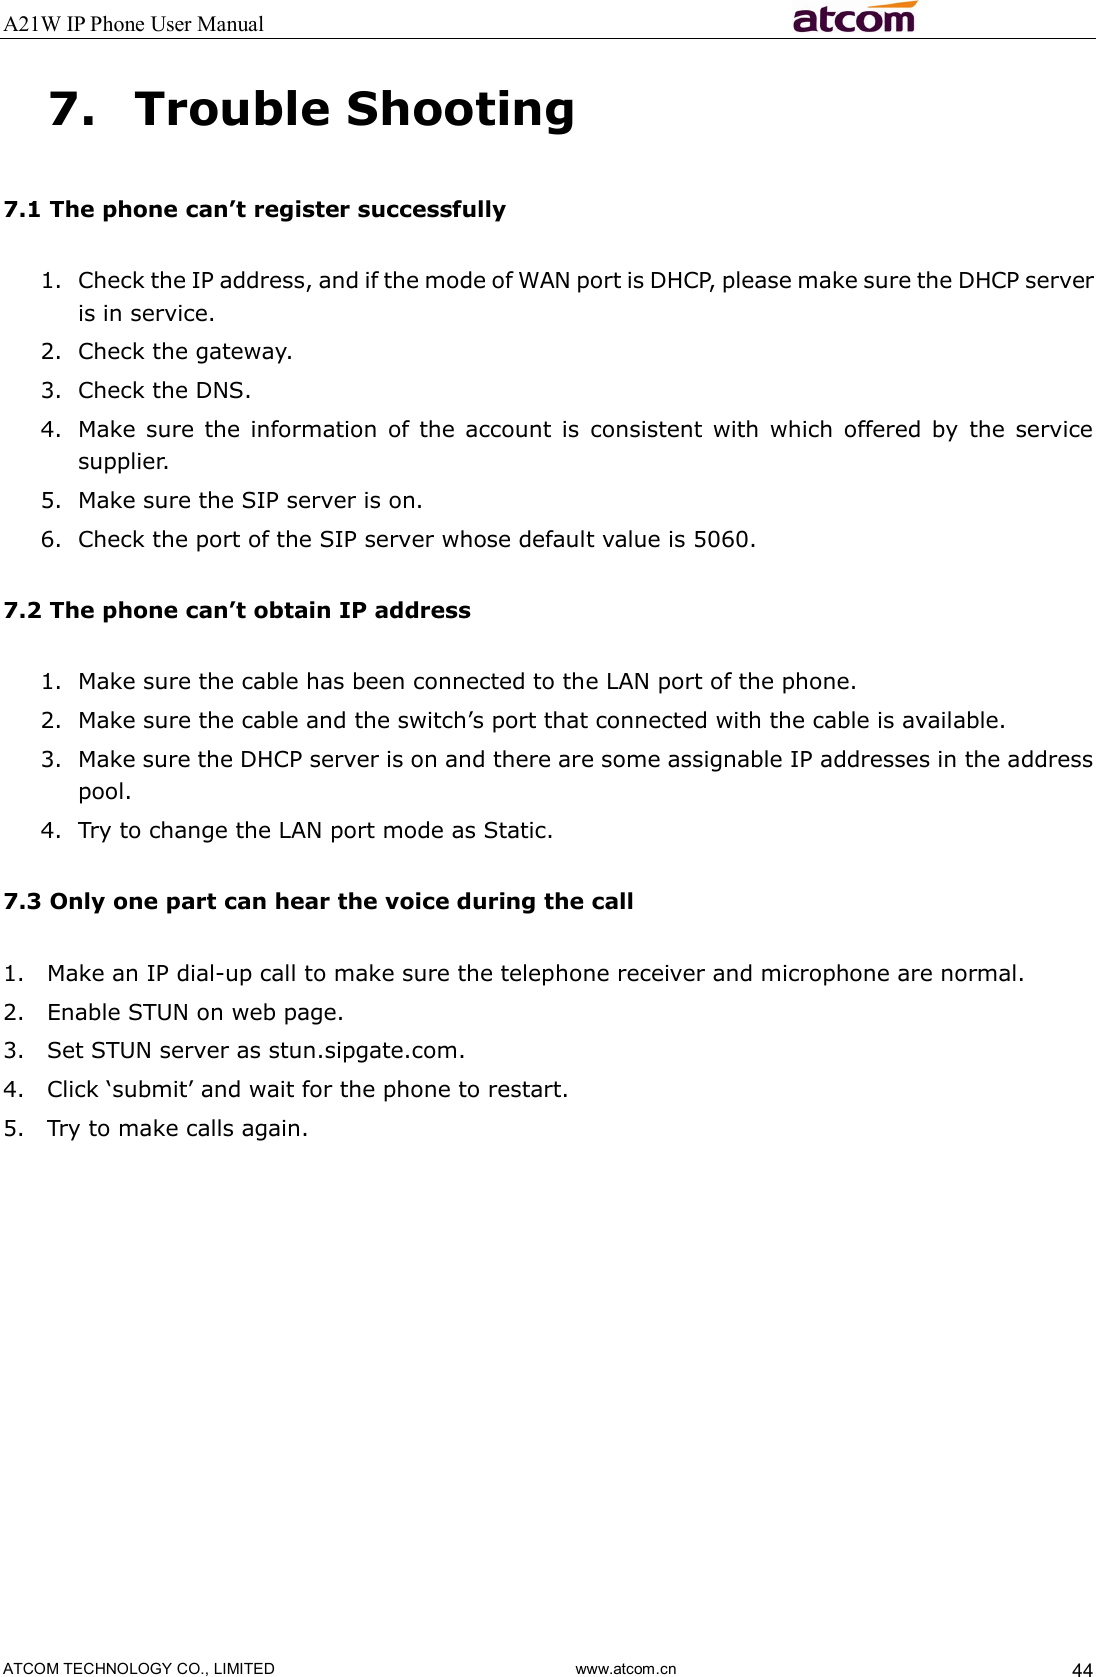 A21W IP Phone User Manual                                                          ATCOM TECHNOLOGY CO., LIMITED                              www.atcom.cn  44 7. Trouble Shooting 7.1 The phone can’t register successfully 1. Check the IP address, and if the mode of WAN port is DHCP, please make sure the DHCP server is in service. 2. Check the gateway. 3. Check the DNS. 4. Make sure  the  information  of  the account  is  consistent with  which  offered by  the  service supplier. 5. Make sure the SIP server is on. 6. Check the port of the SIP server whose default value is 5060. 7.2 The phone can’t obtain IP address 1. Make sure the cable has been connected to the LAN port of the phone. 2. Make sure the cable and the switch’s port that connected with the cable is available. 3. Make sure the DHCP server is on and there are some assignable IP addresses in the address pool. 4. Try to change the LAN port mode as Static. 7.3 Only one part can hear the voice during the call 1. Make an IP dial-up call to make sure the telephone receiver and microphone are normal. 2. Enable STUN on web page. 3. Set STUN server as stun.sipgate.com. 4. Click ‘submit’ and wait for the phone to restart. 5. Try to make calls again. 